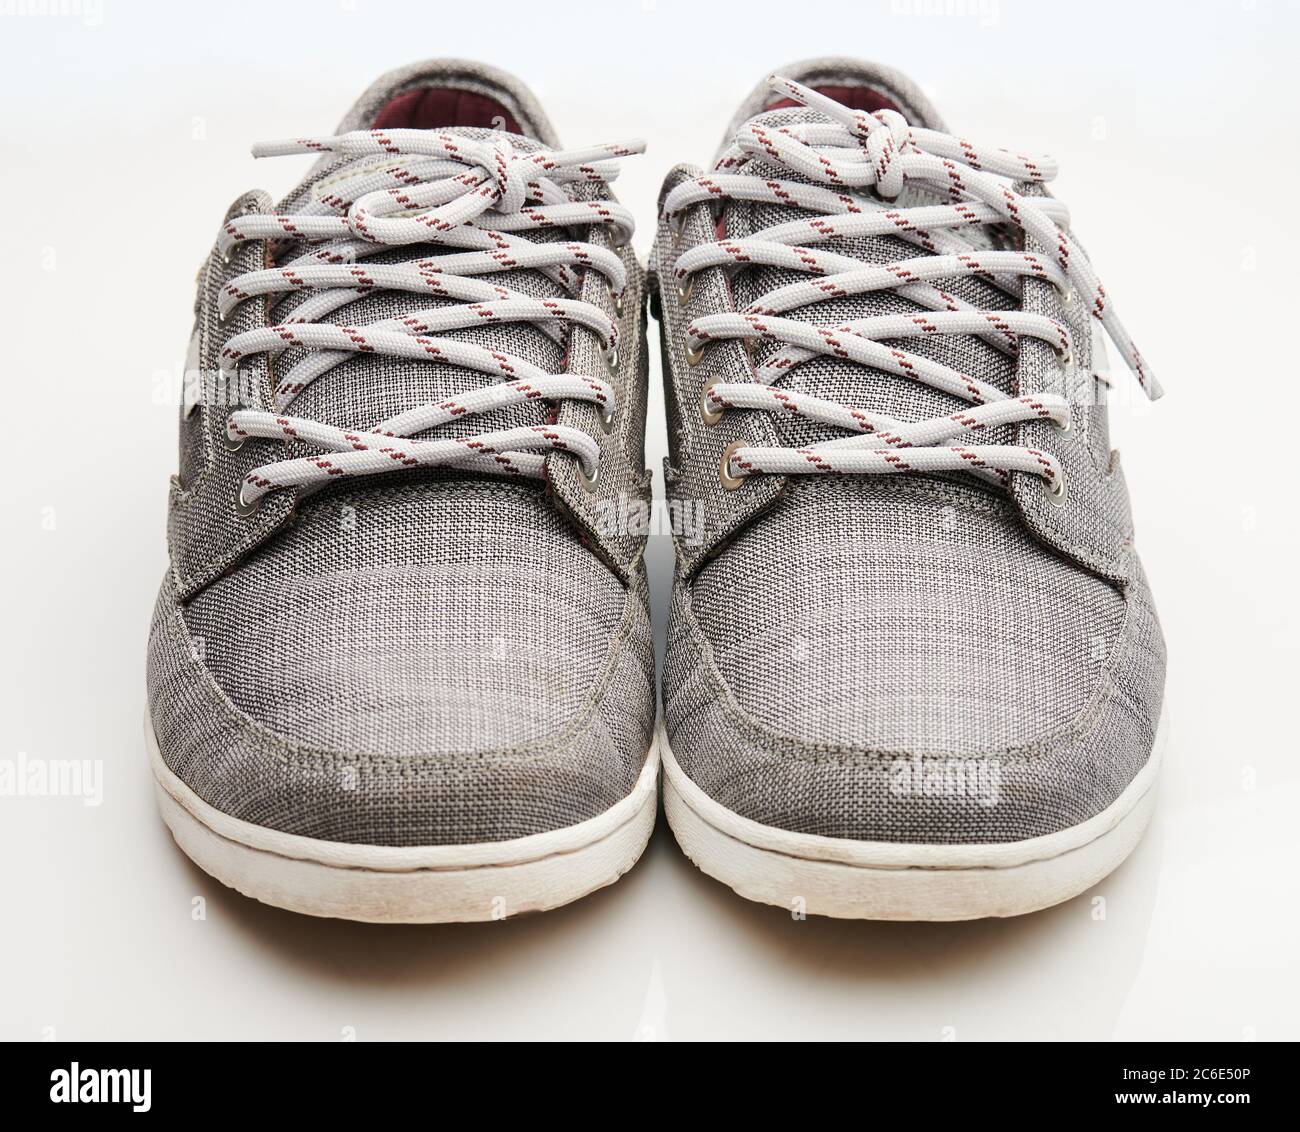 Cloth gray sneakers shoes front view isolated on white background Stock Photo